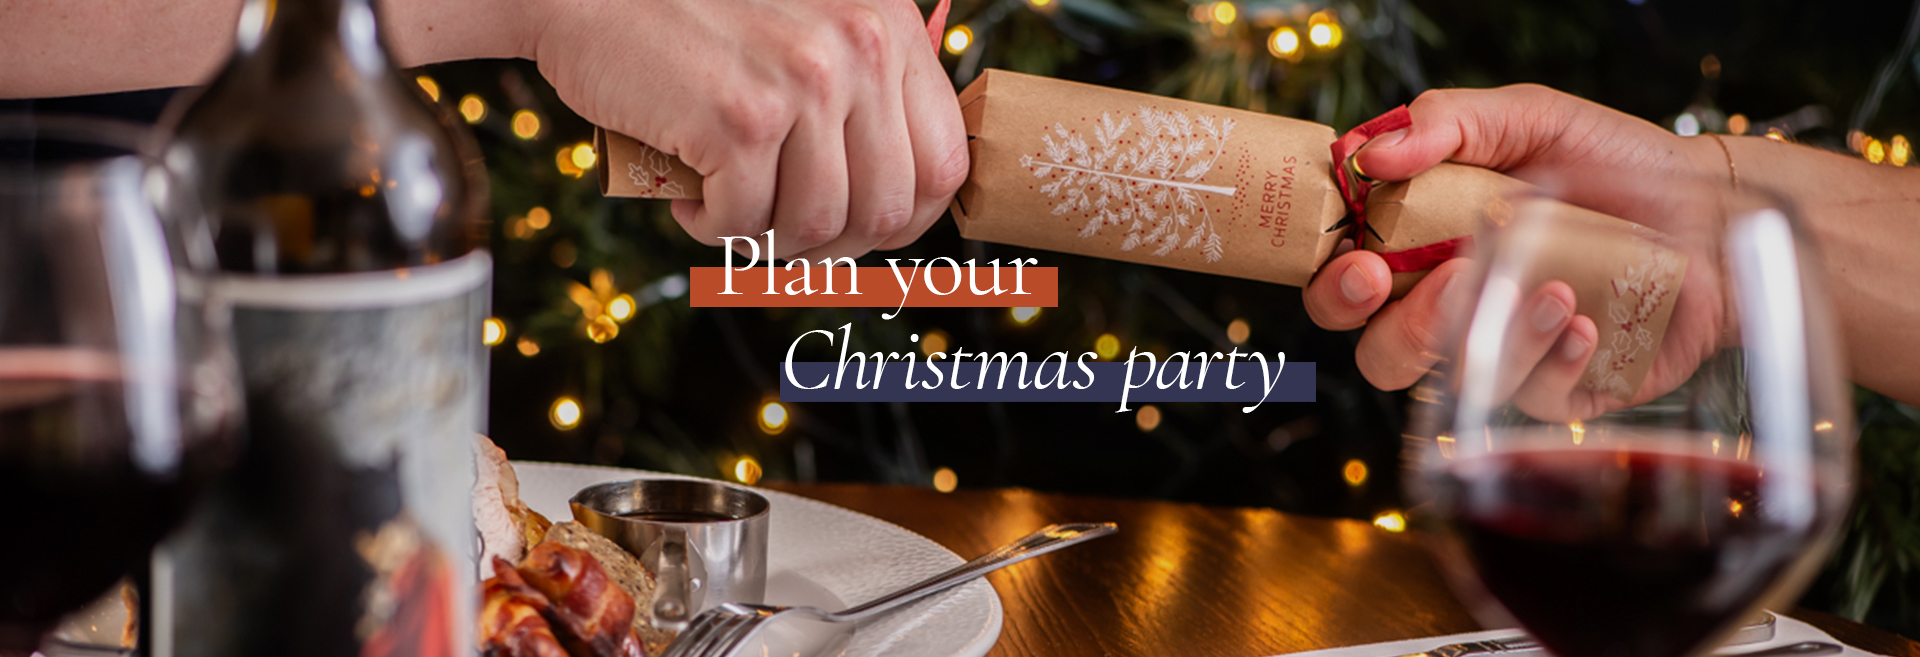 Christmas party at The Botanist on the Green